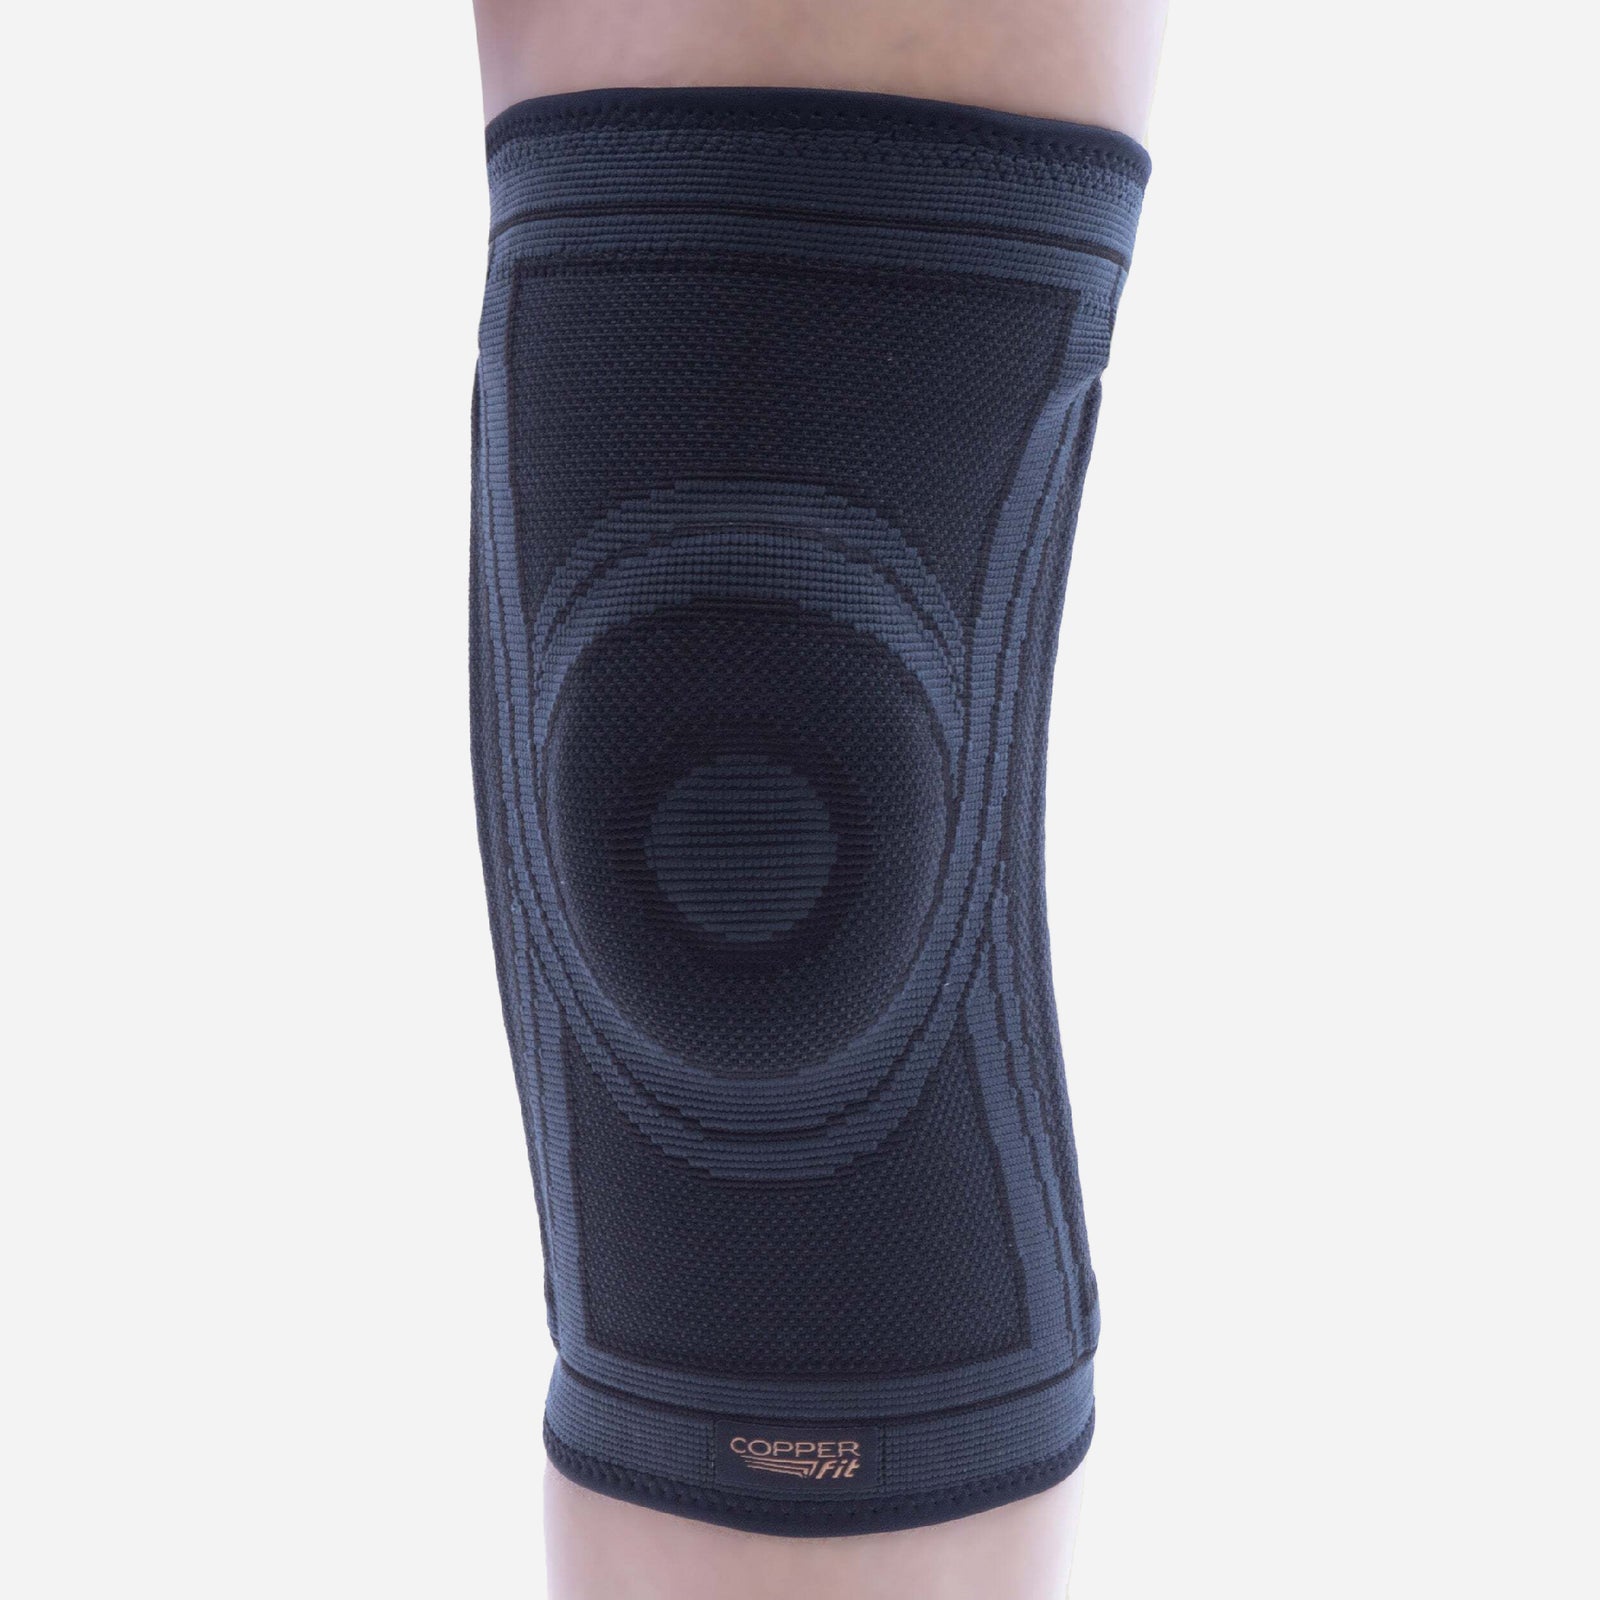 NEW CVS Copper Infused Compression Knee Sleeve Size Large FREE